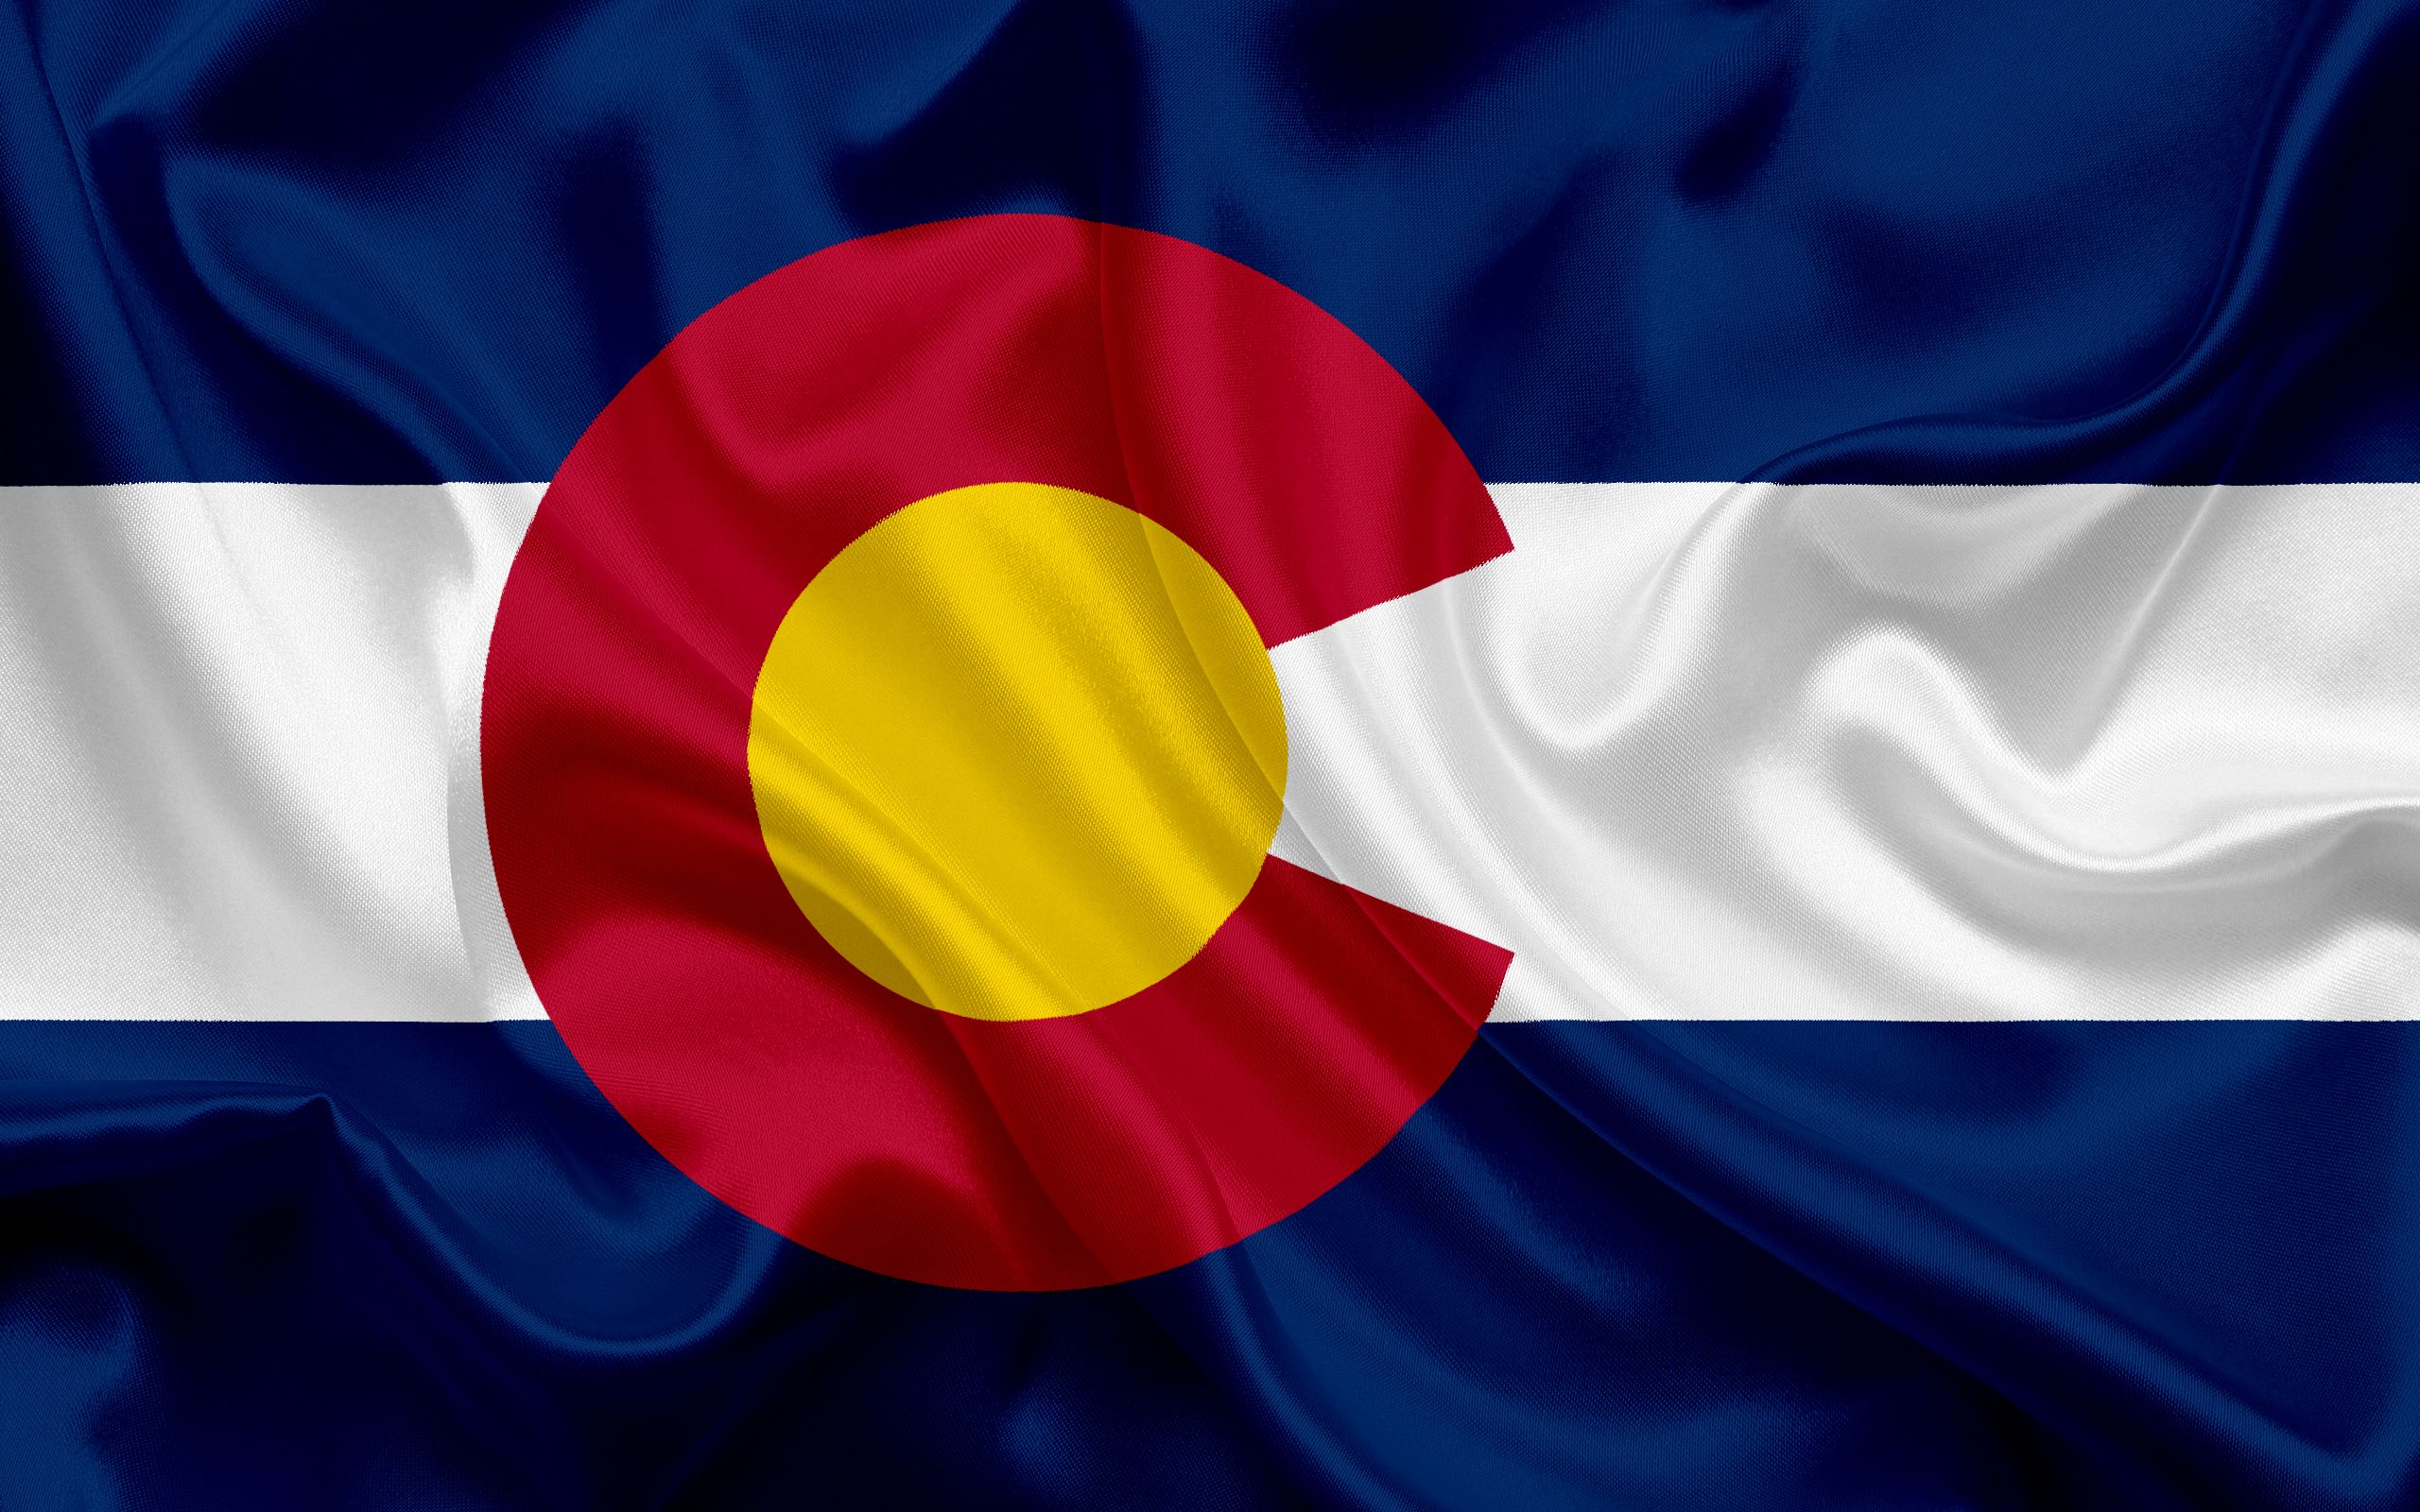 Download wallpaper Colorado Flag, flags of States, flag State of Colorado, USA, state Colorado, Blue silk for desktop with resolution 2560x1600. High Quality HD picture wallpaper